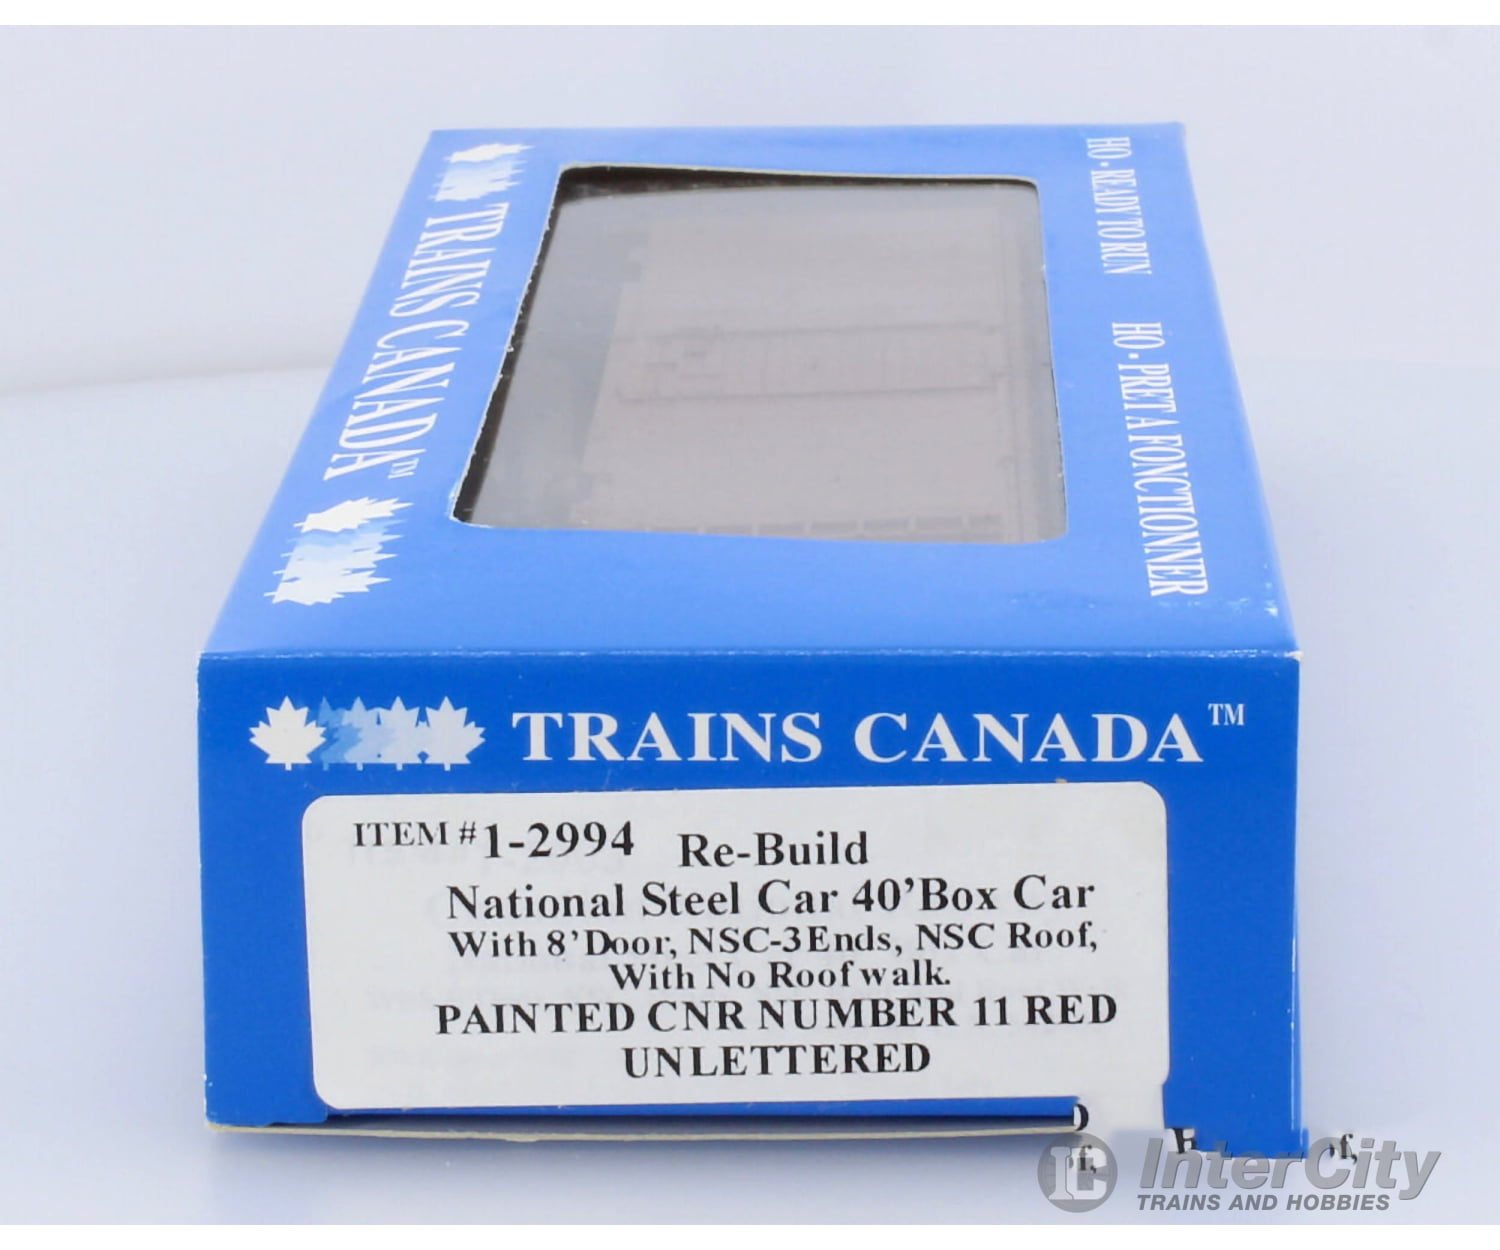 Trains Canada Ho Scale Re-Build Nsc 40 Box Car Cnr Red Unlettered Freight Cars